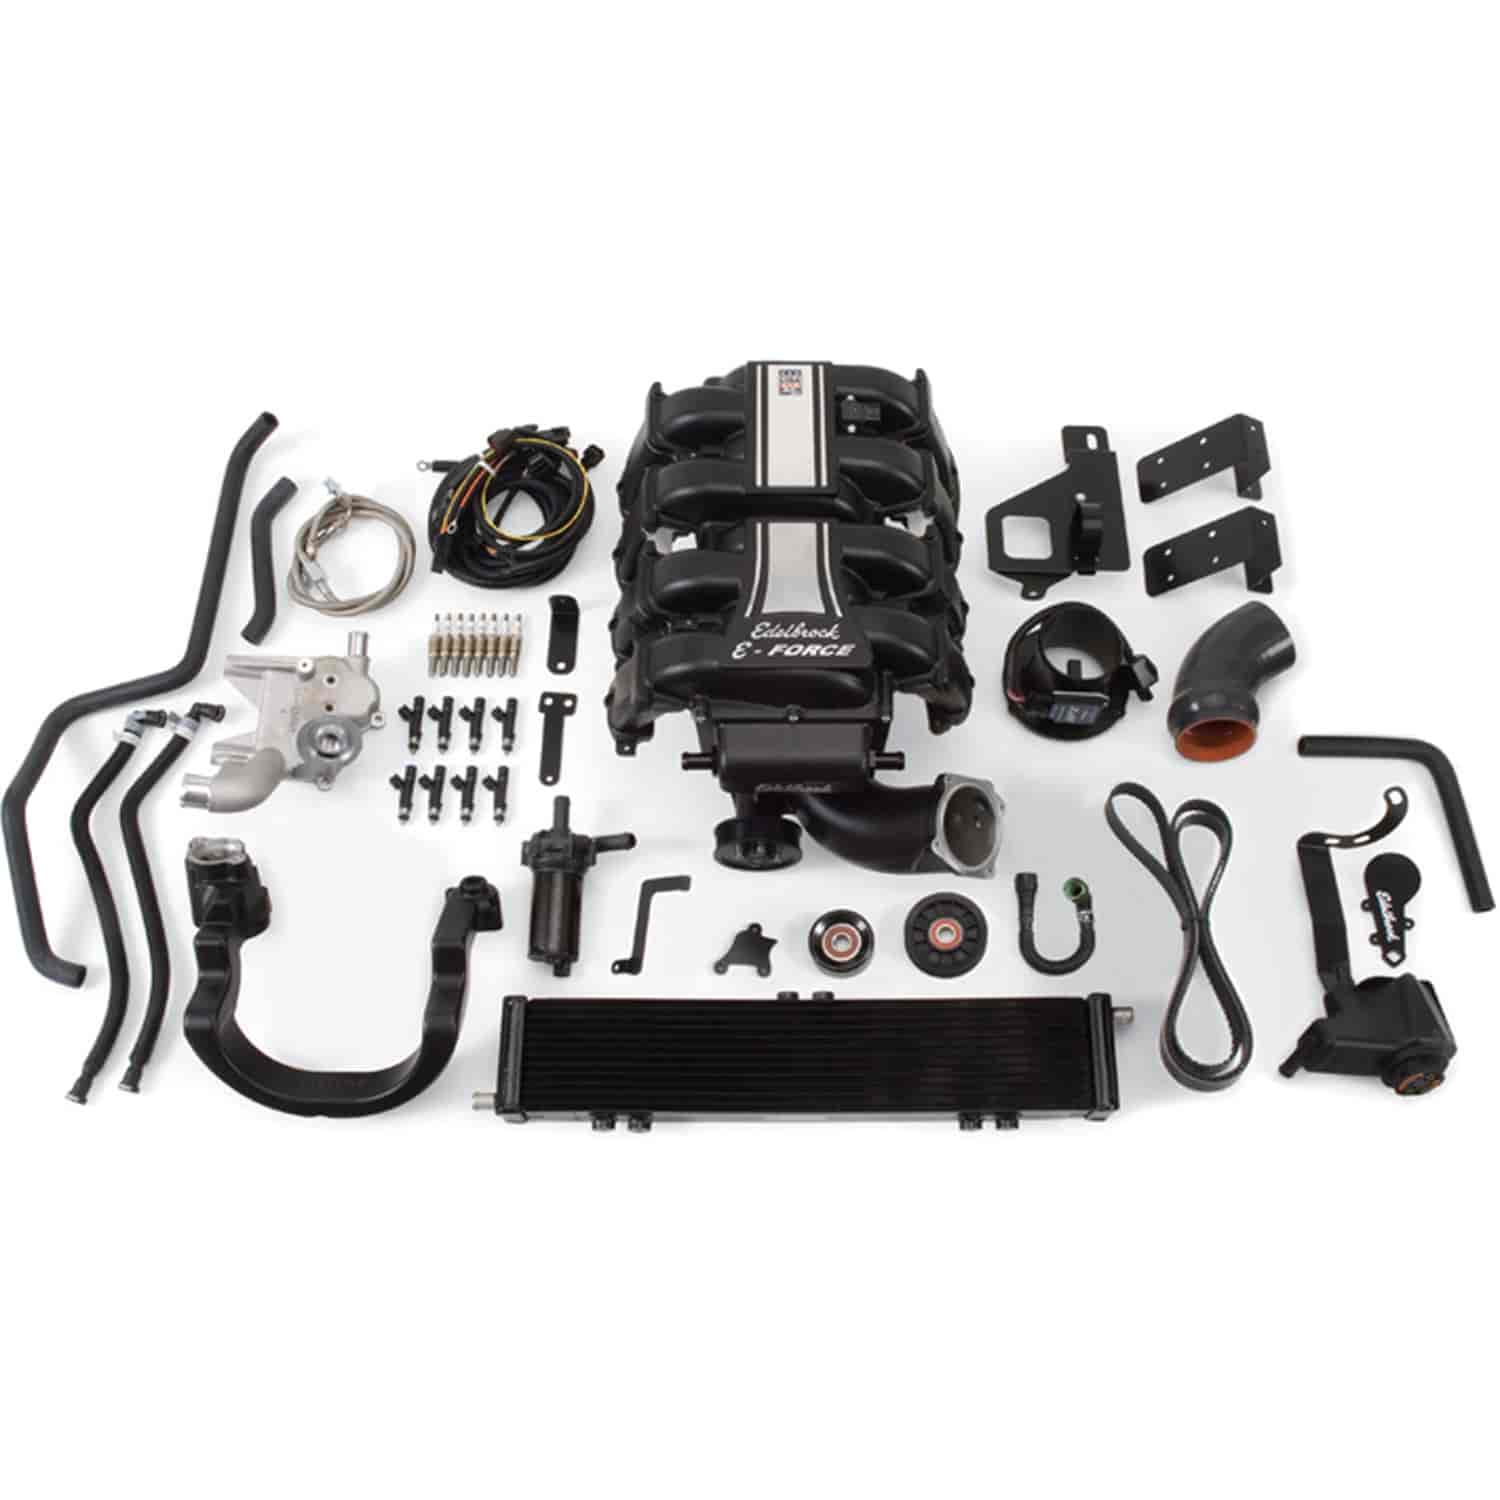 E-Force Supercharger Kit for 2009-2010 Ford F-150 2WD 5.4L 3V, Expedition, and Lincoln Navigator